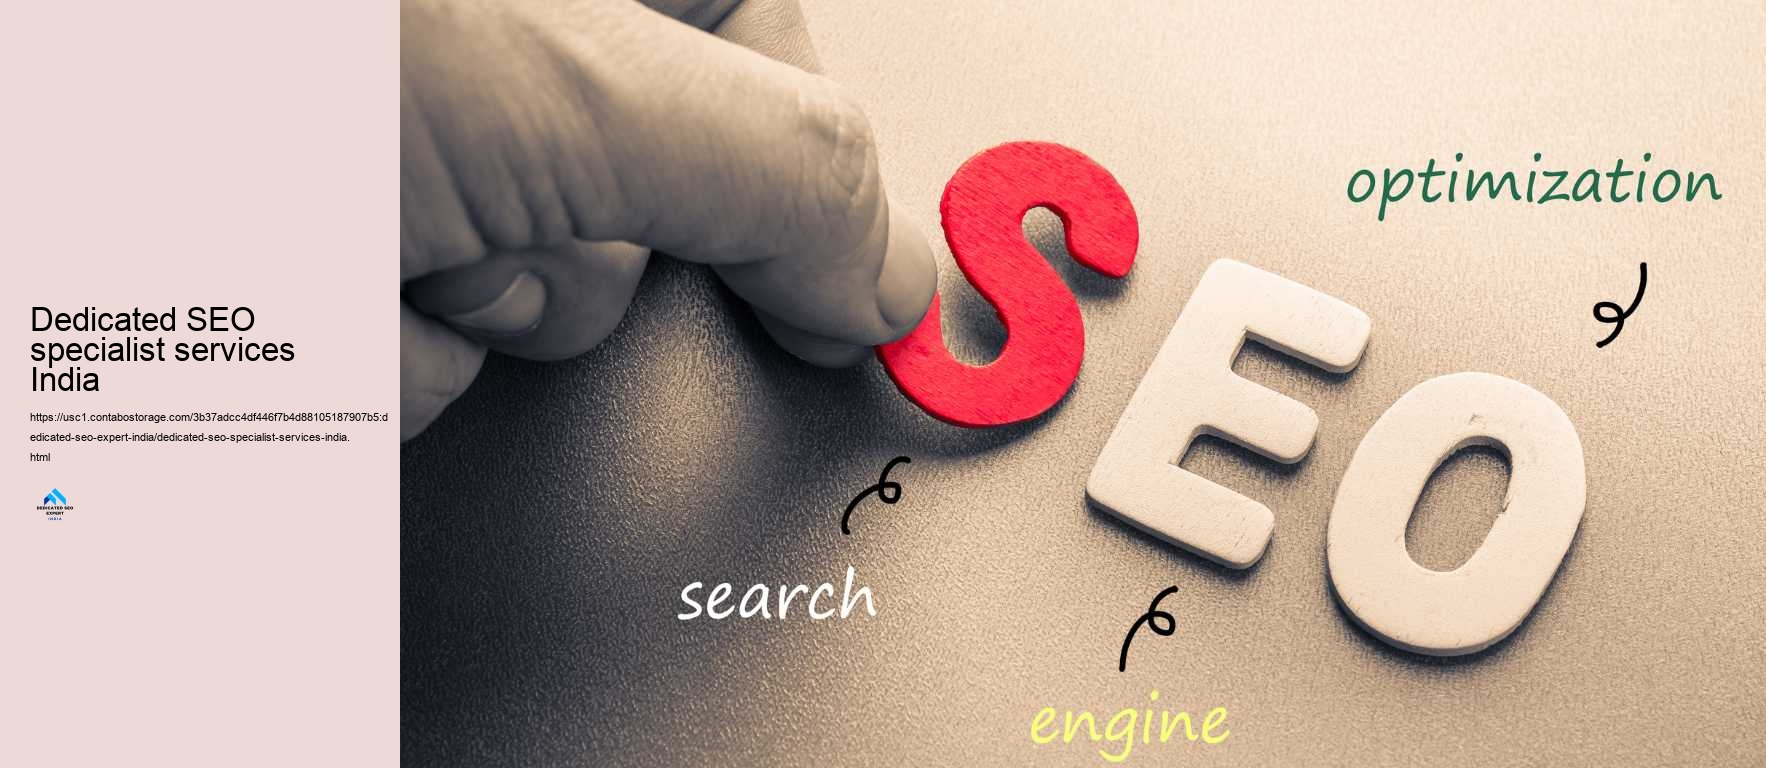 Dedicated SEO specialist services India